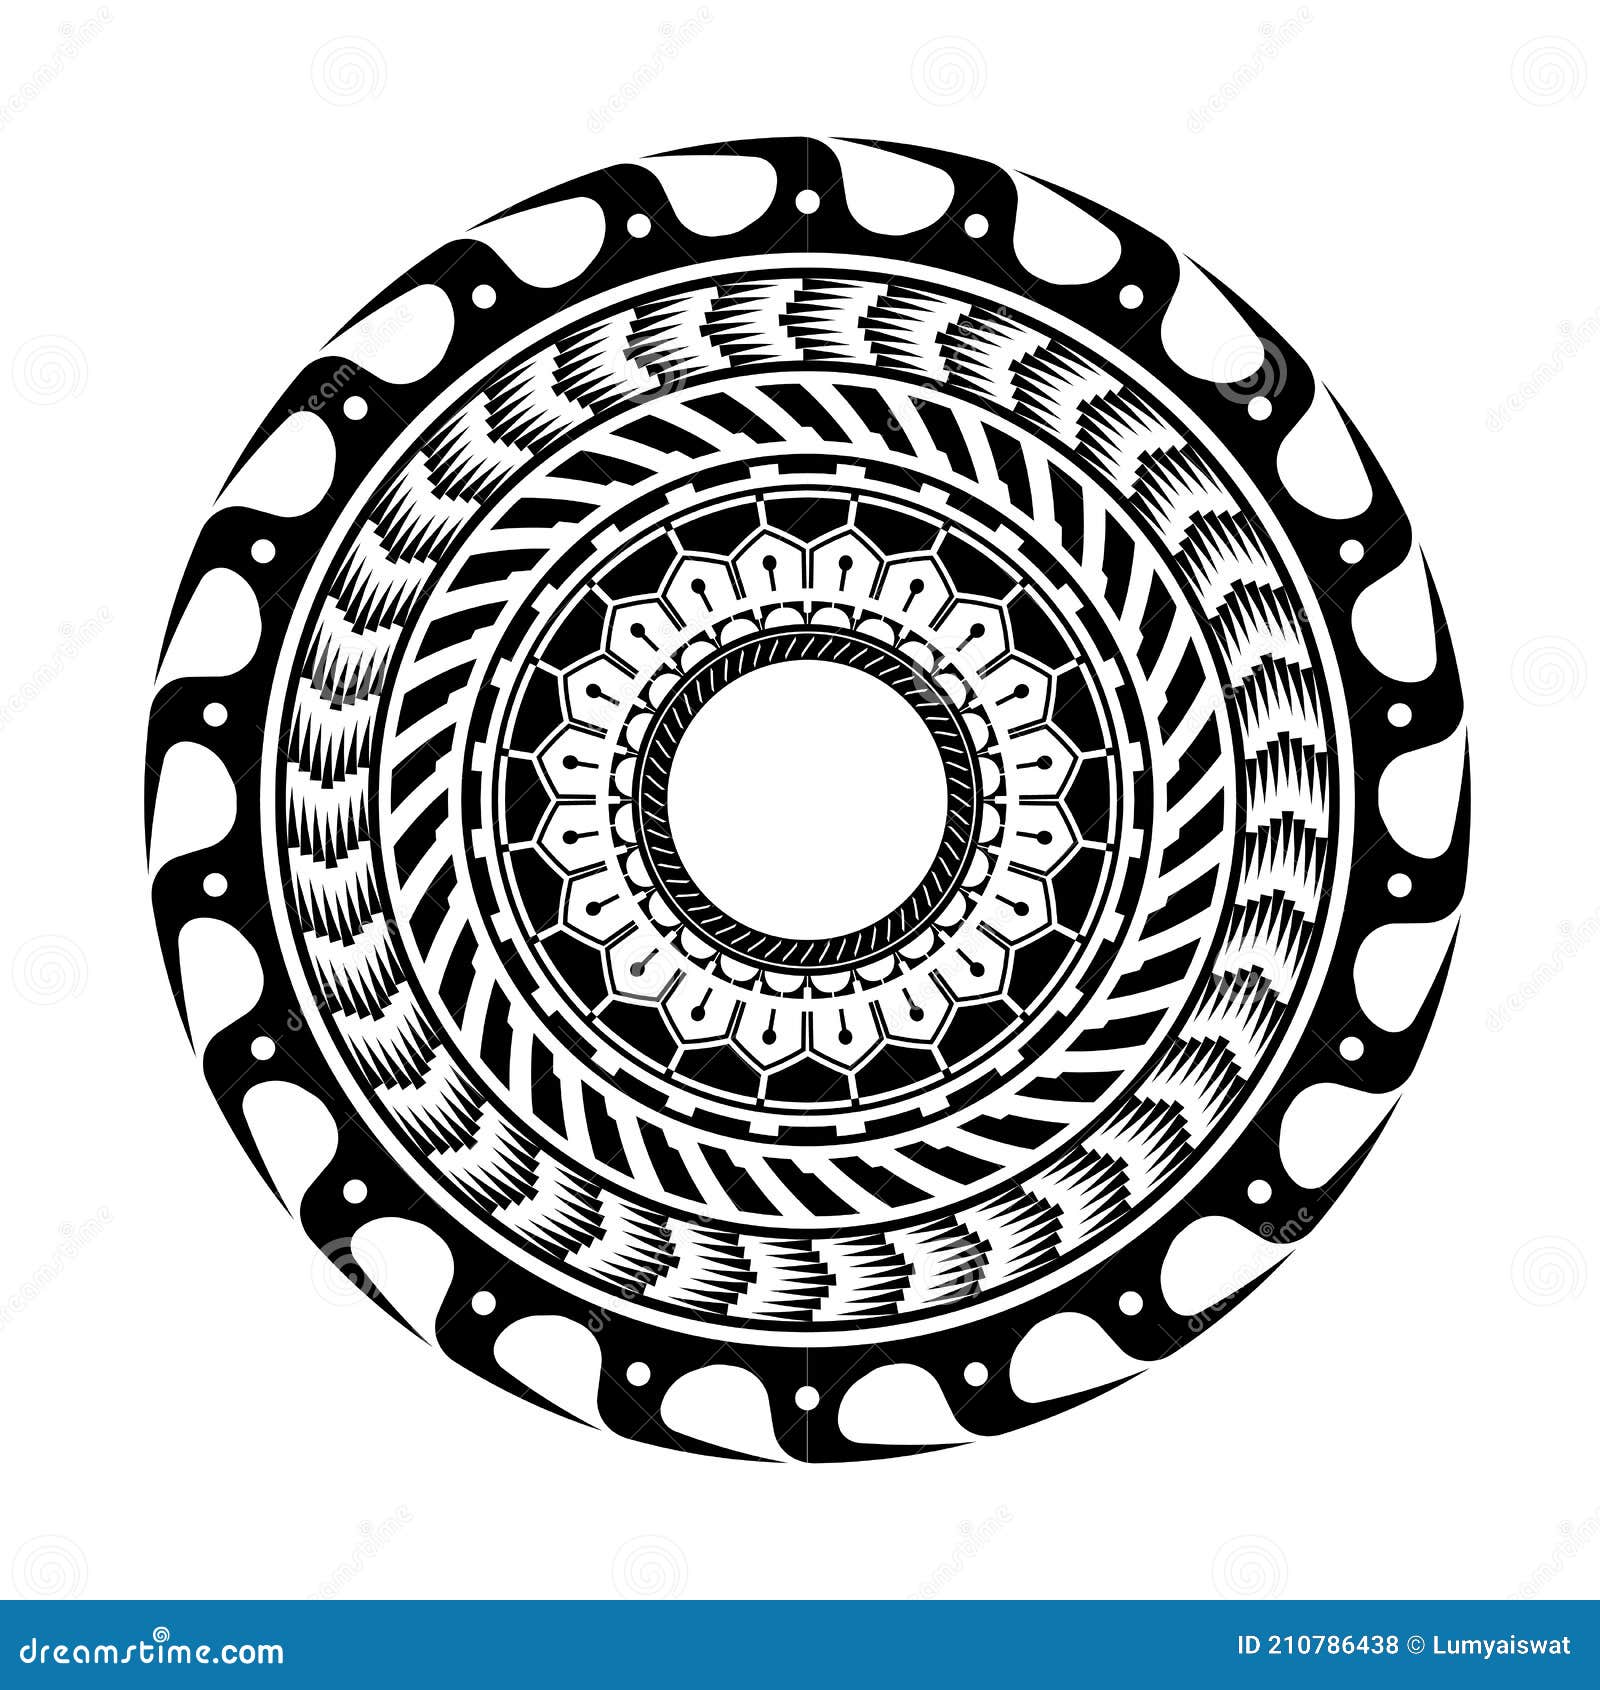 Abstract Polynesian Tattoo Circle Design Stock Vector - Illustration of abstract, monochrome: 210786438